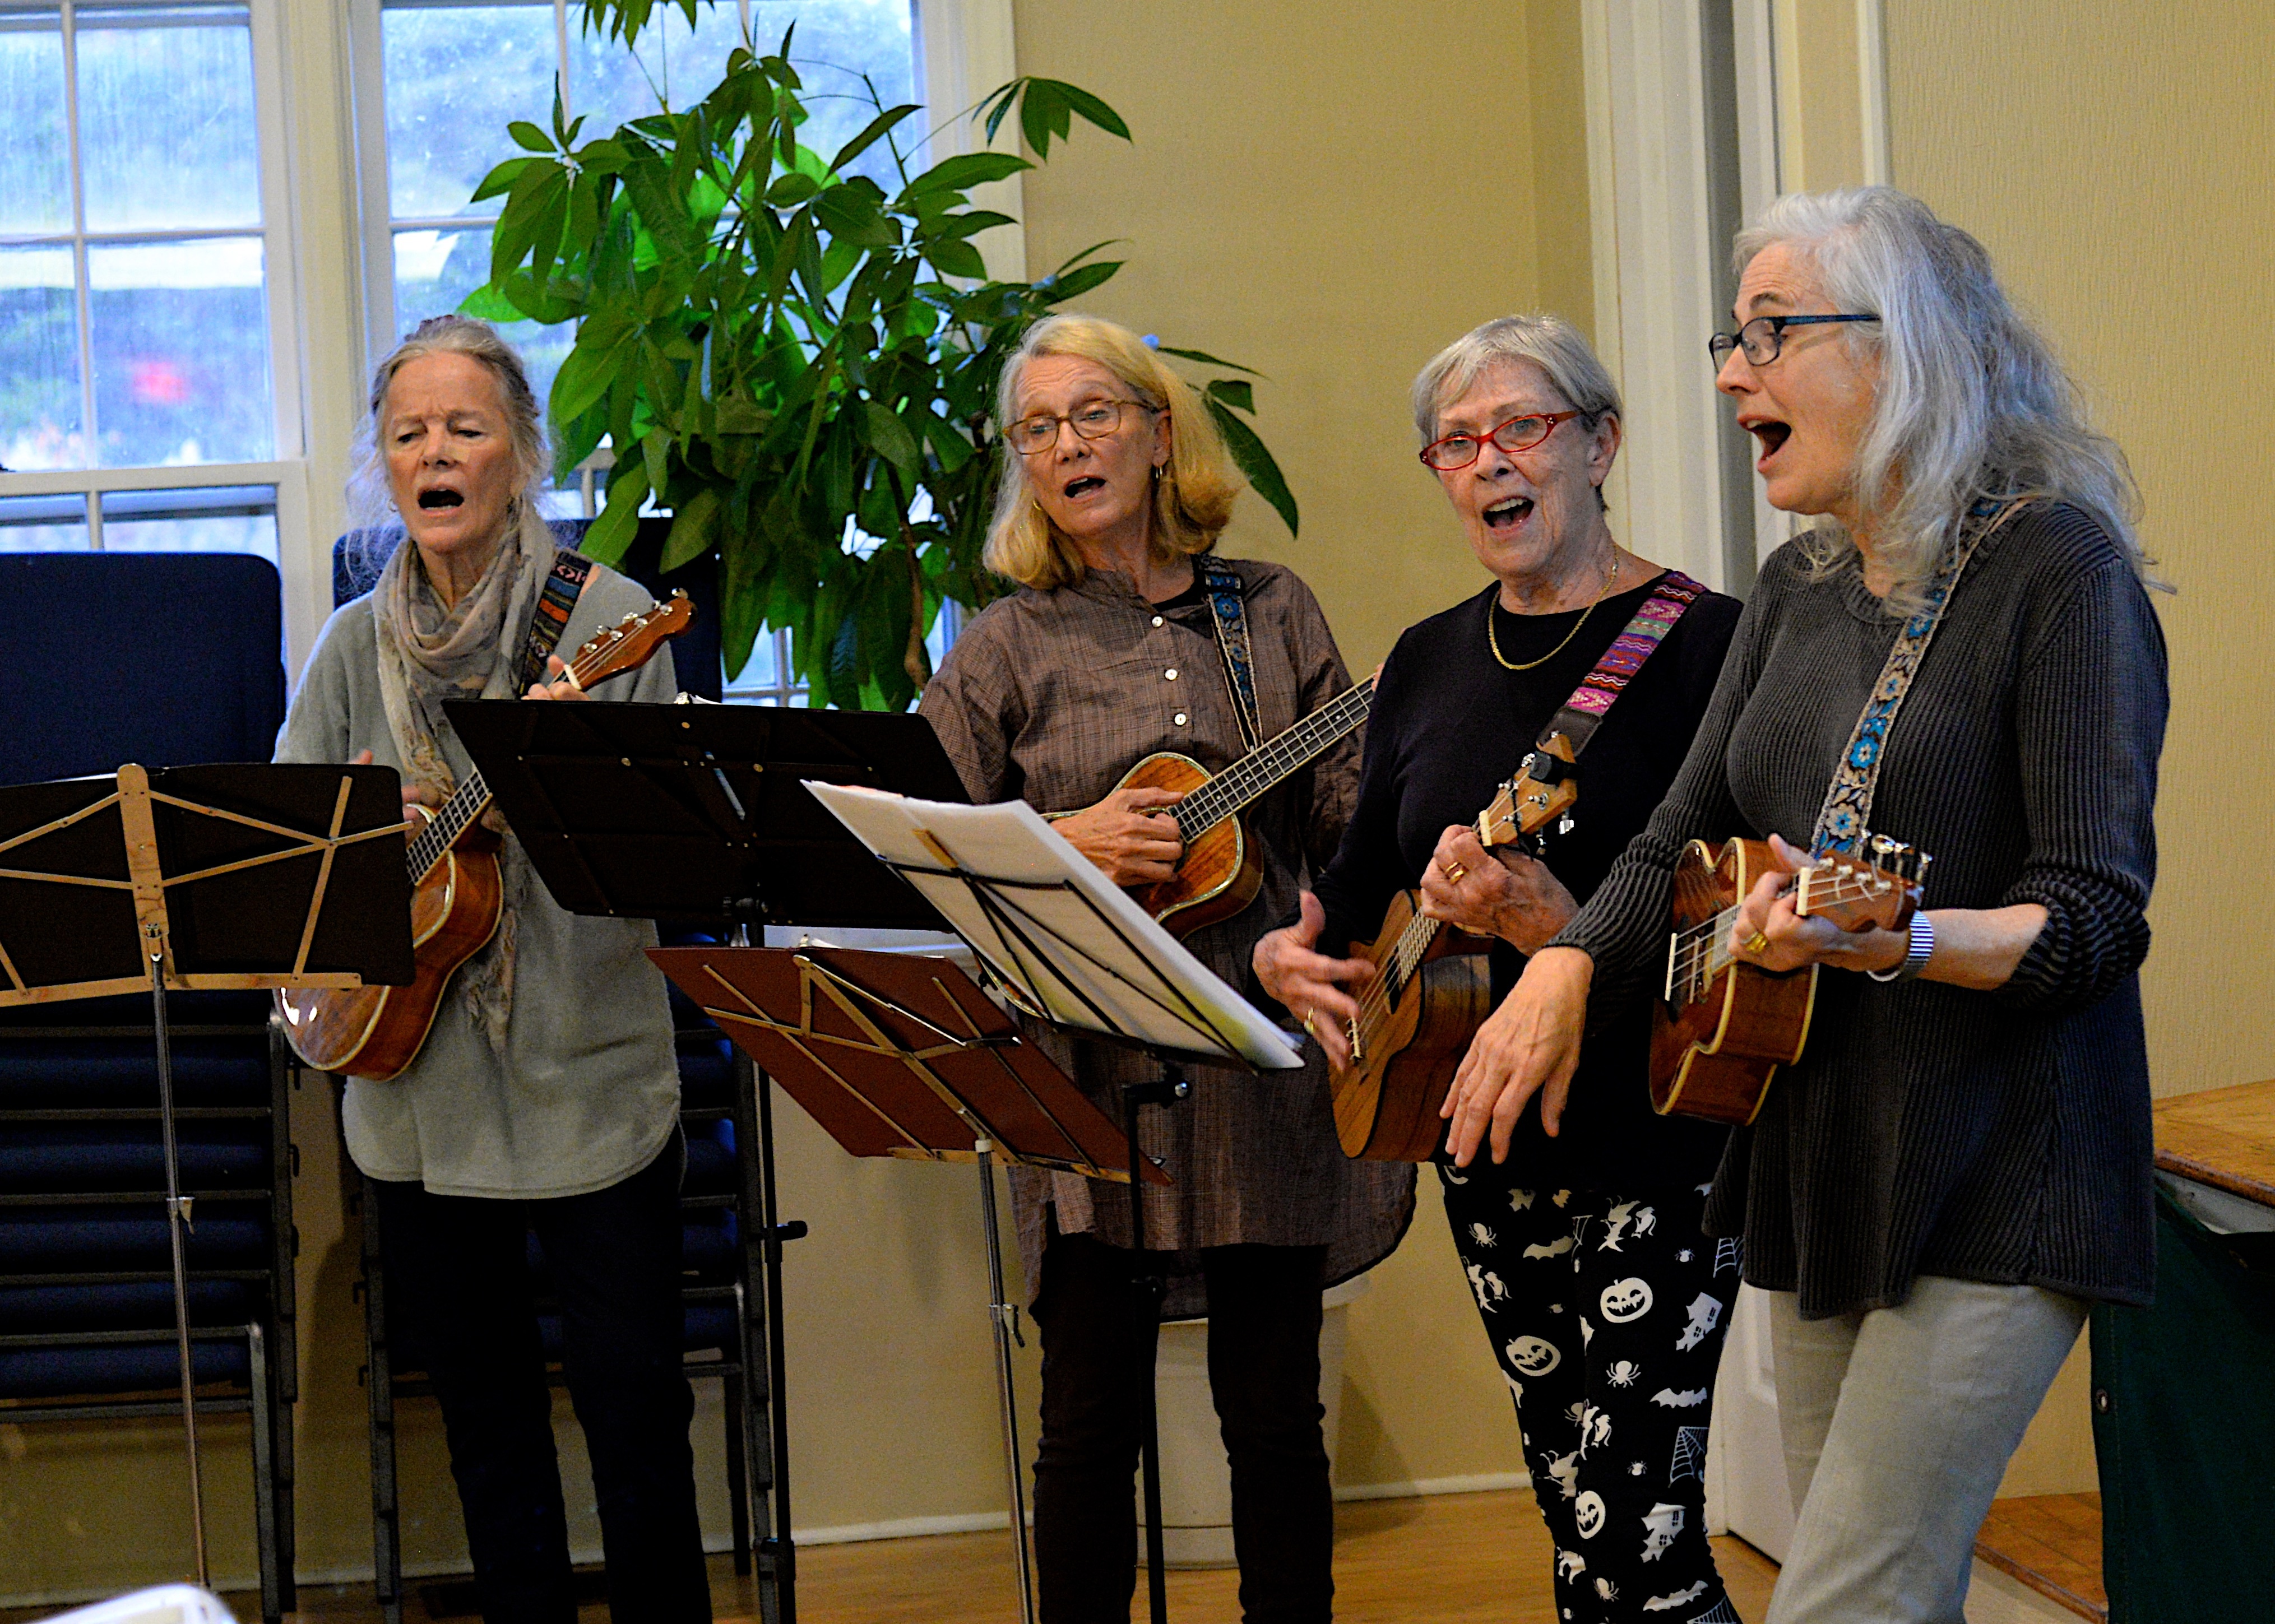 The Springs Community Presbyterian Church hosted a Sing-Along Friday evening, with musical accompaniment by The Eukaladies. KYRIL BROMLEY